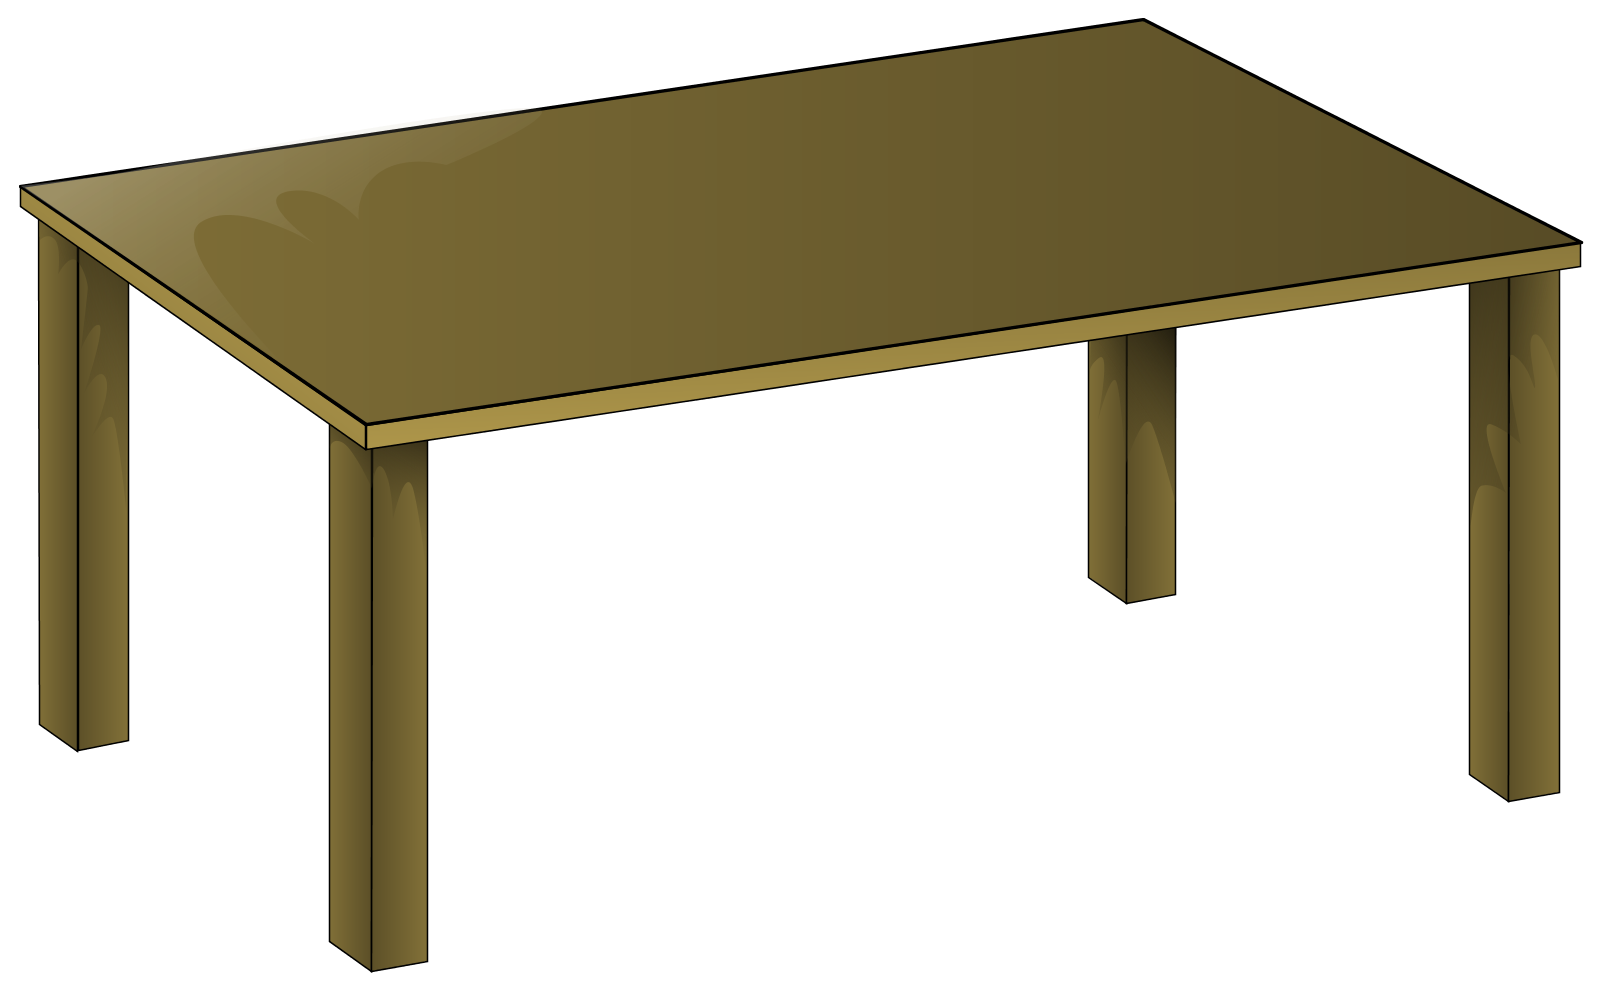 green table clipart - photo #39